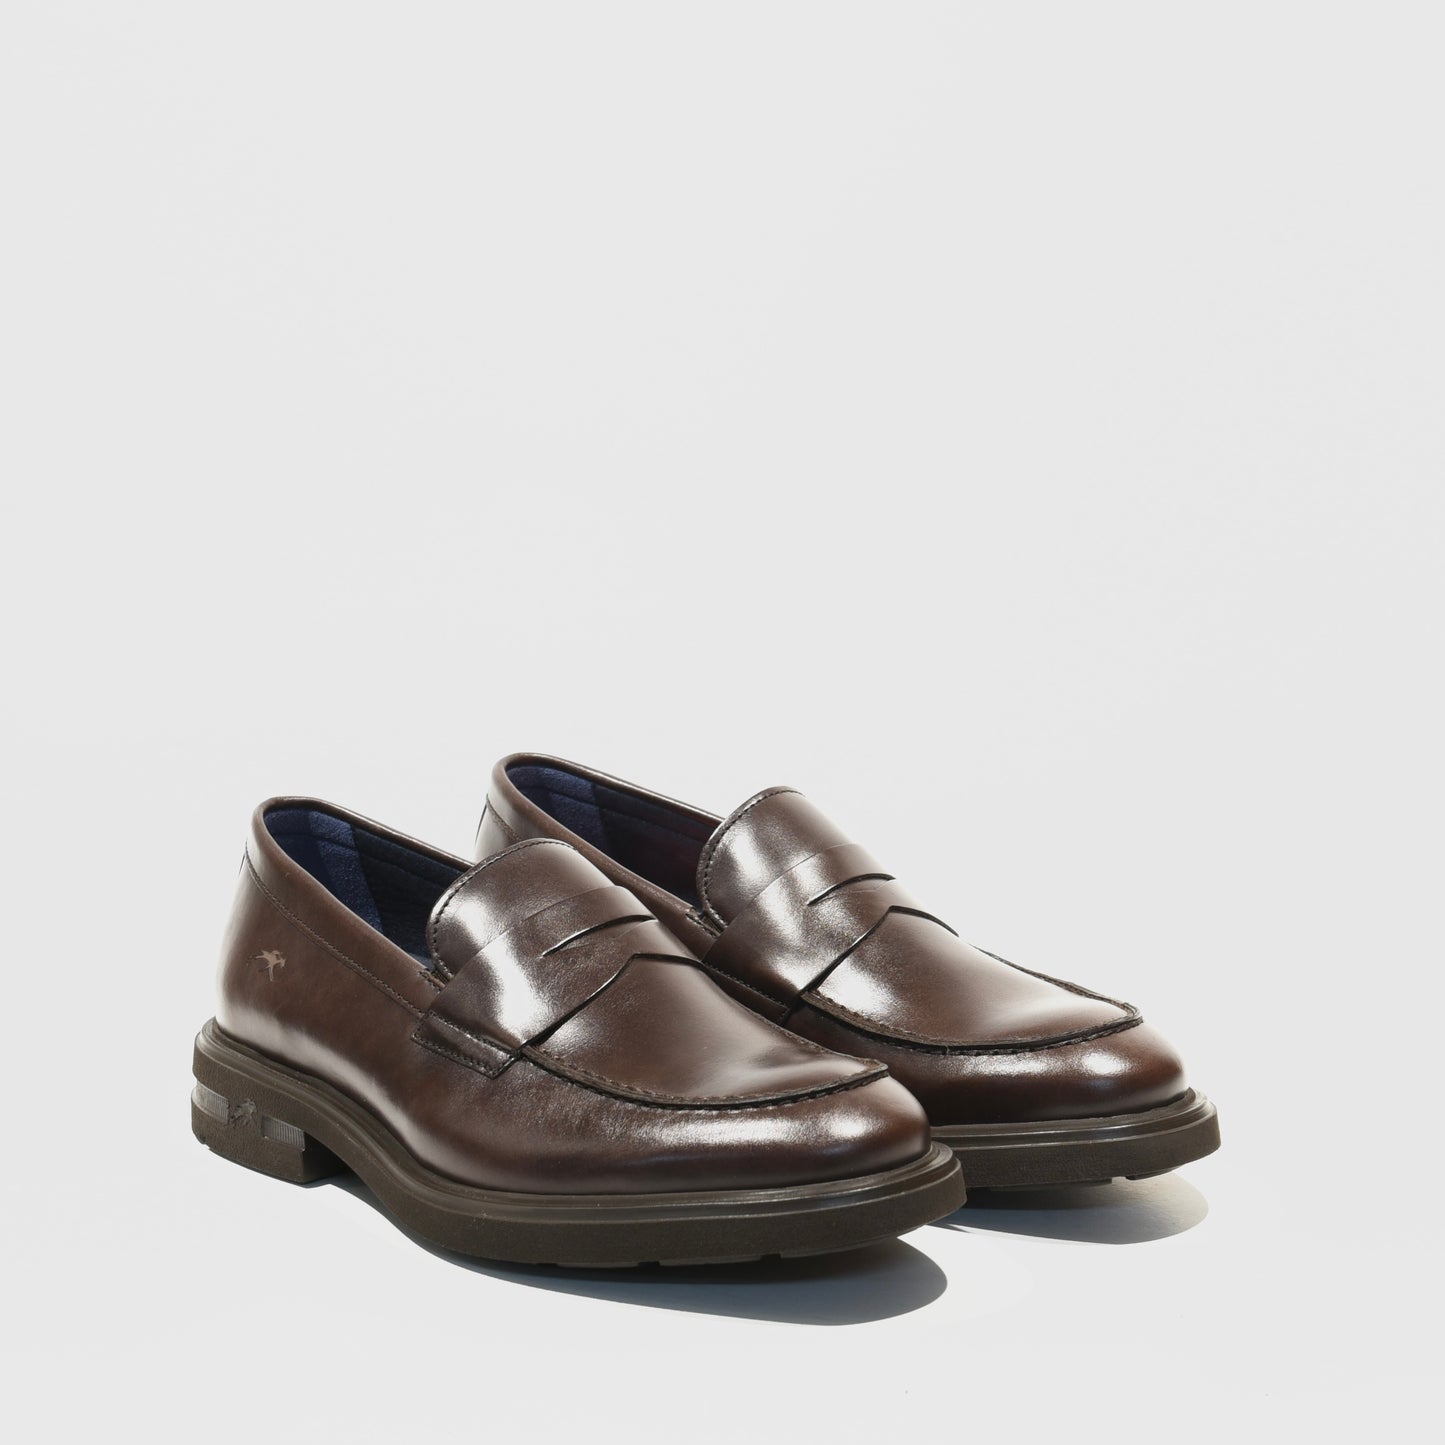 Fluchoes Spanish loafers for men in brown